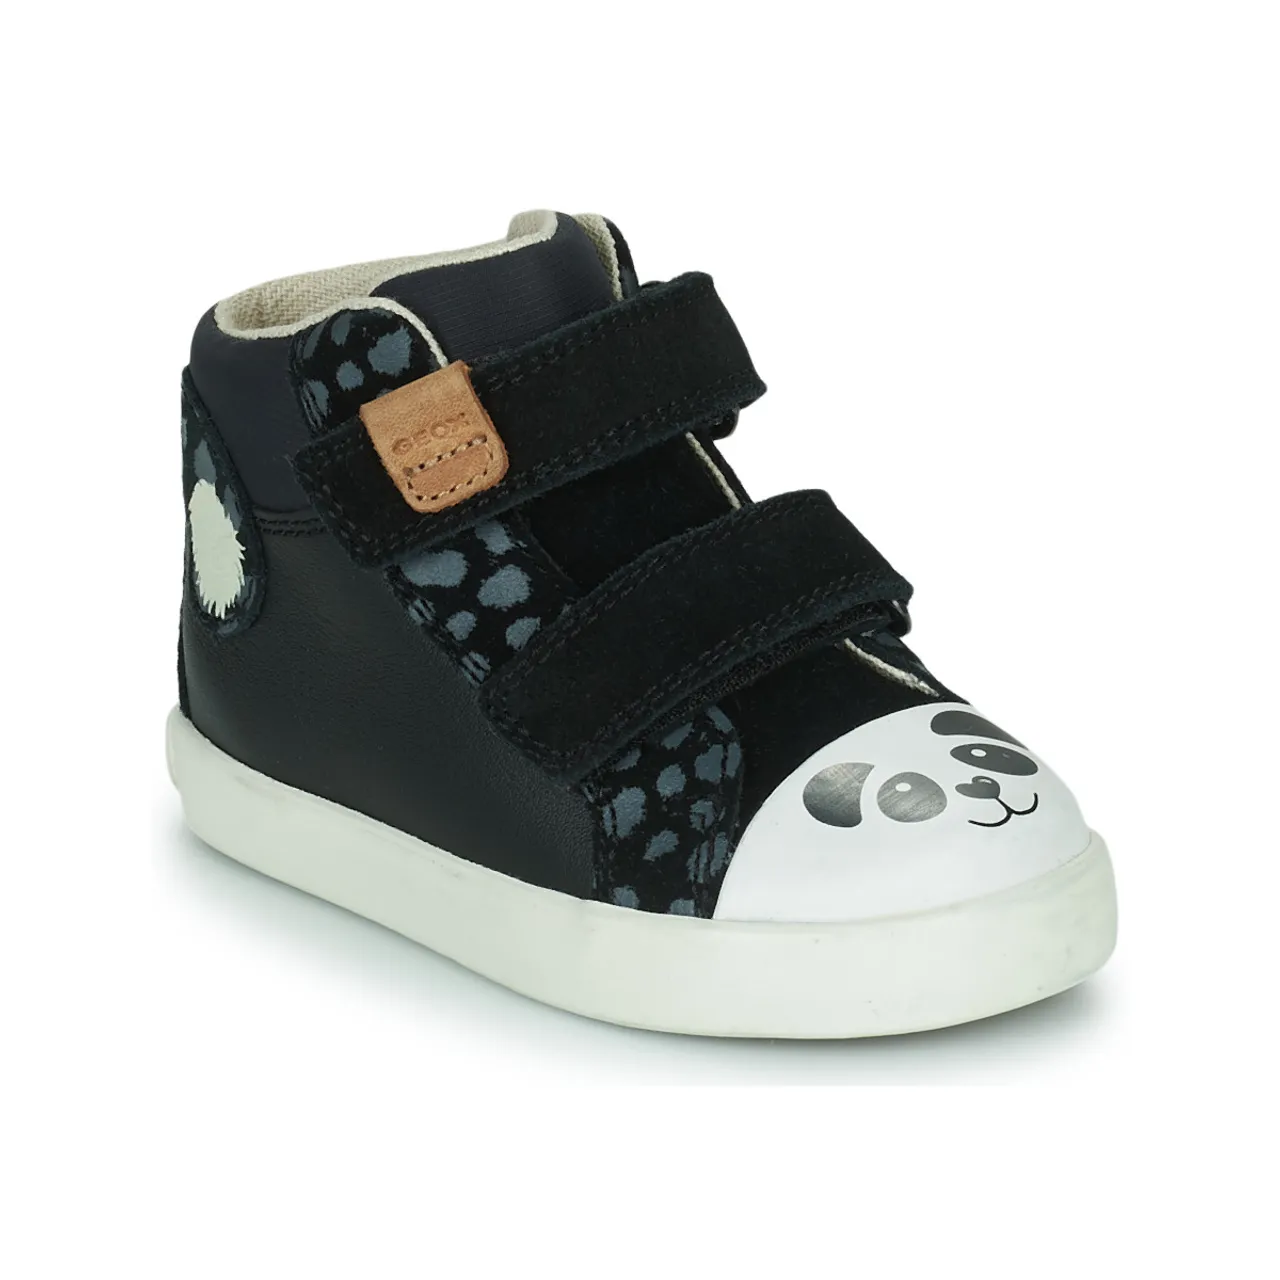 Geox  B KILWI GIRL C  girls's Children's Shoes (High-top Trainers) in Black